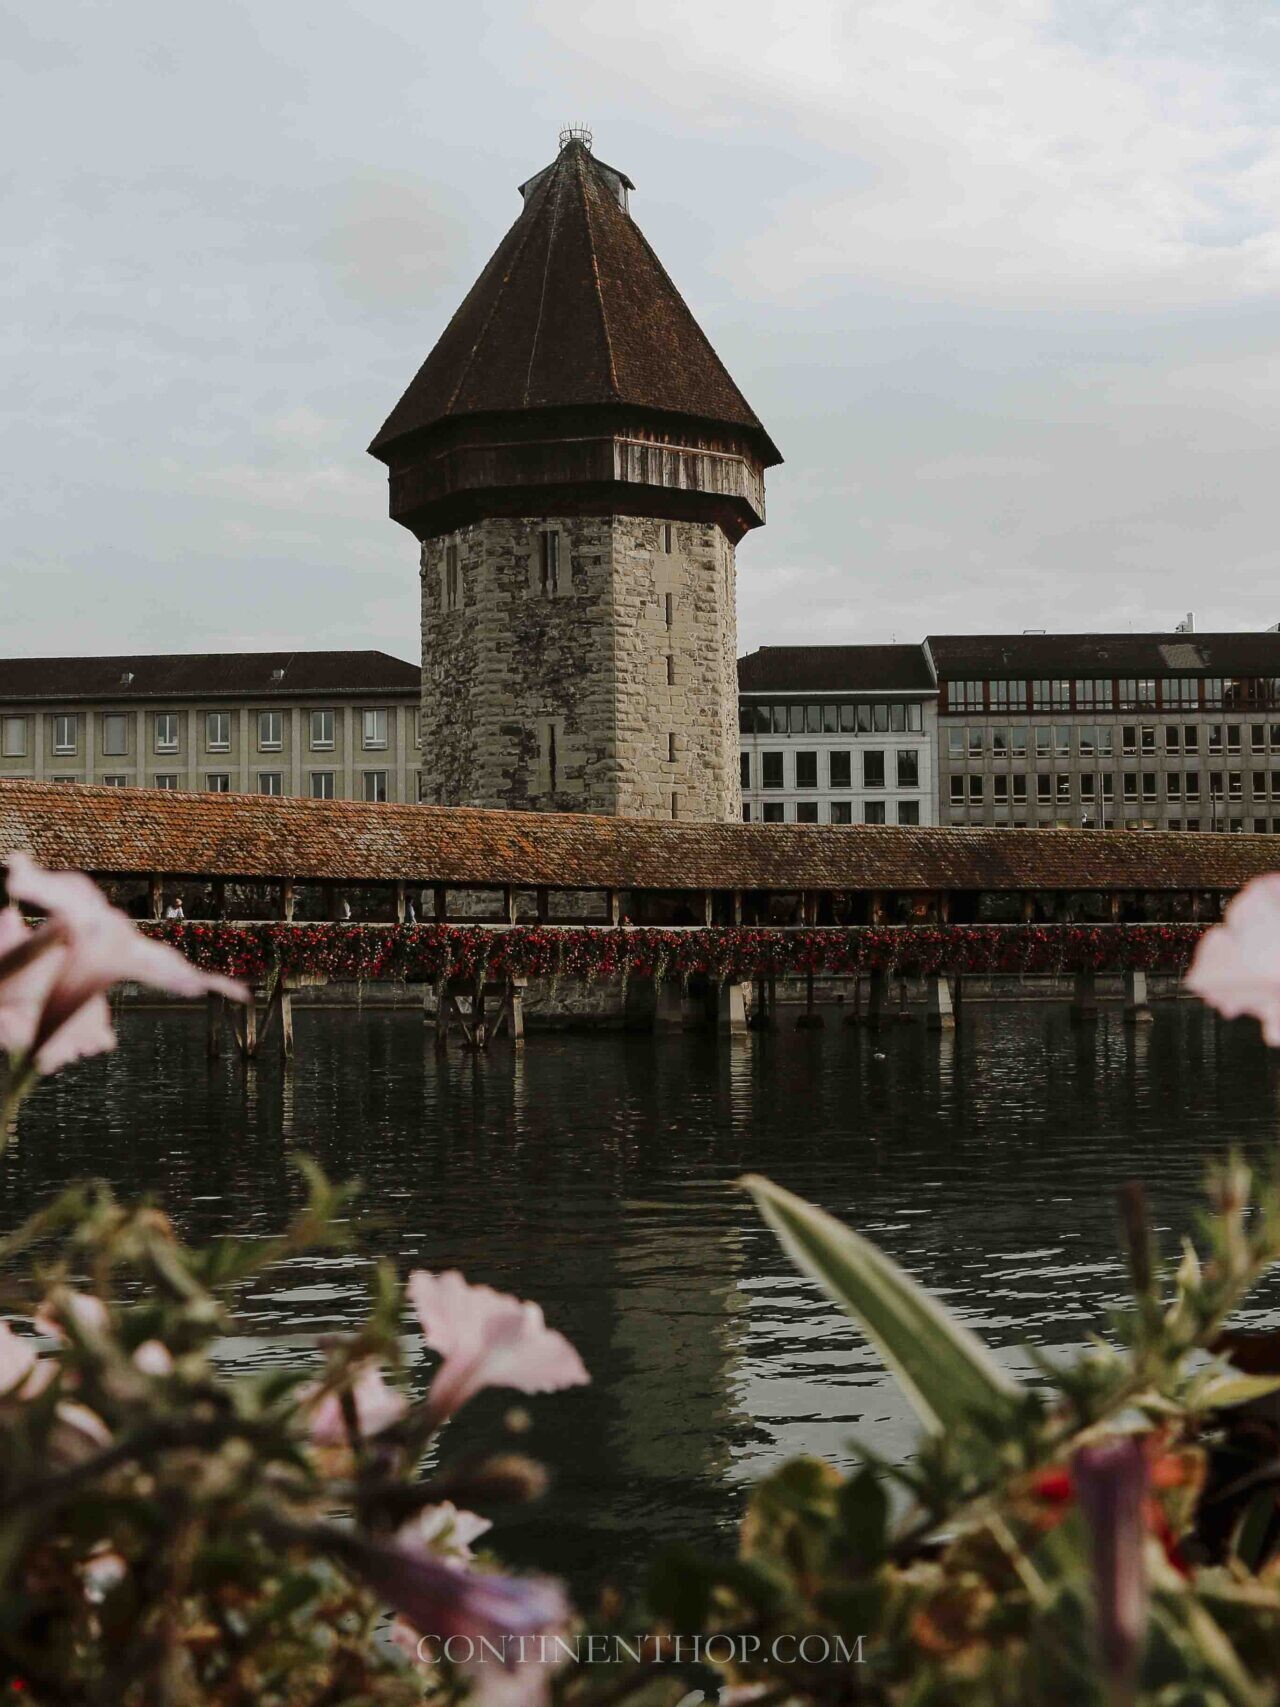 The clocktower of Lucerne by the river on a Switzerland itinerary 14 days in Switzerland itinerary